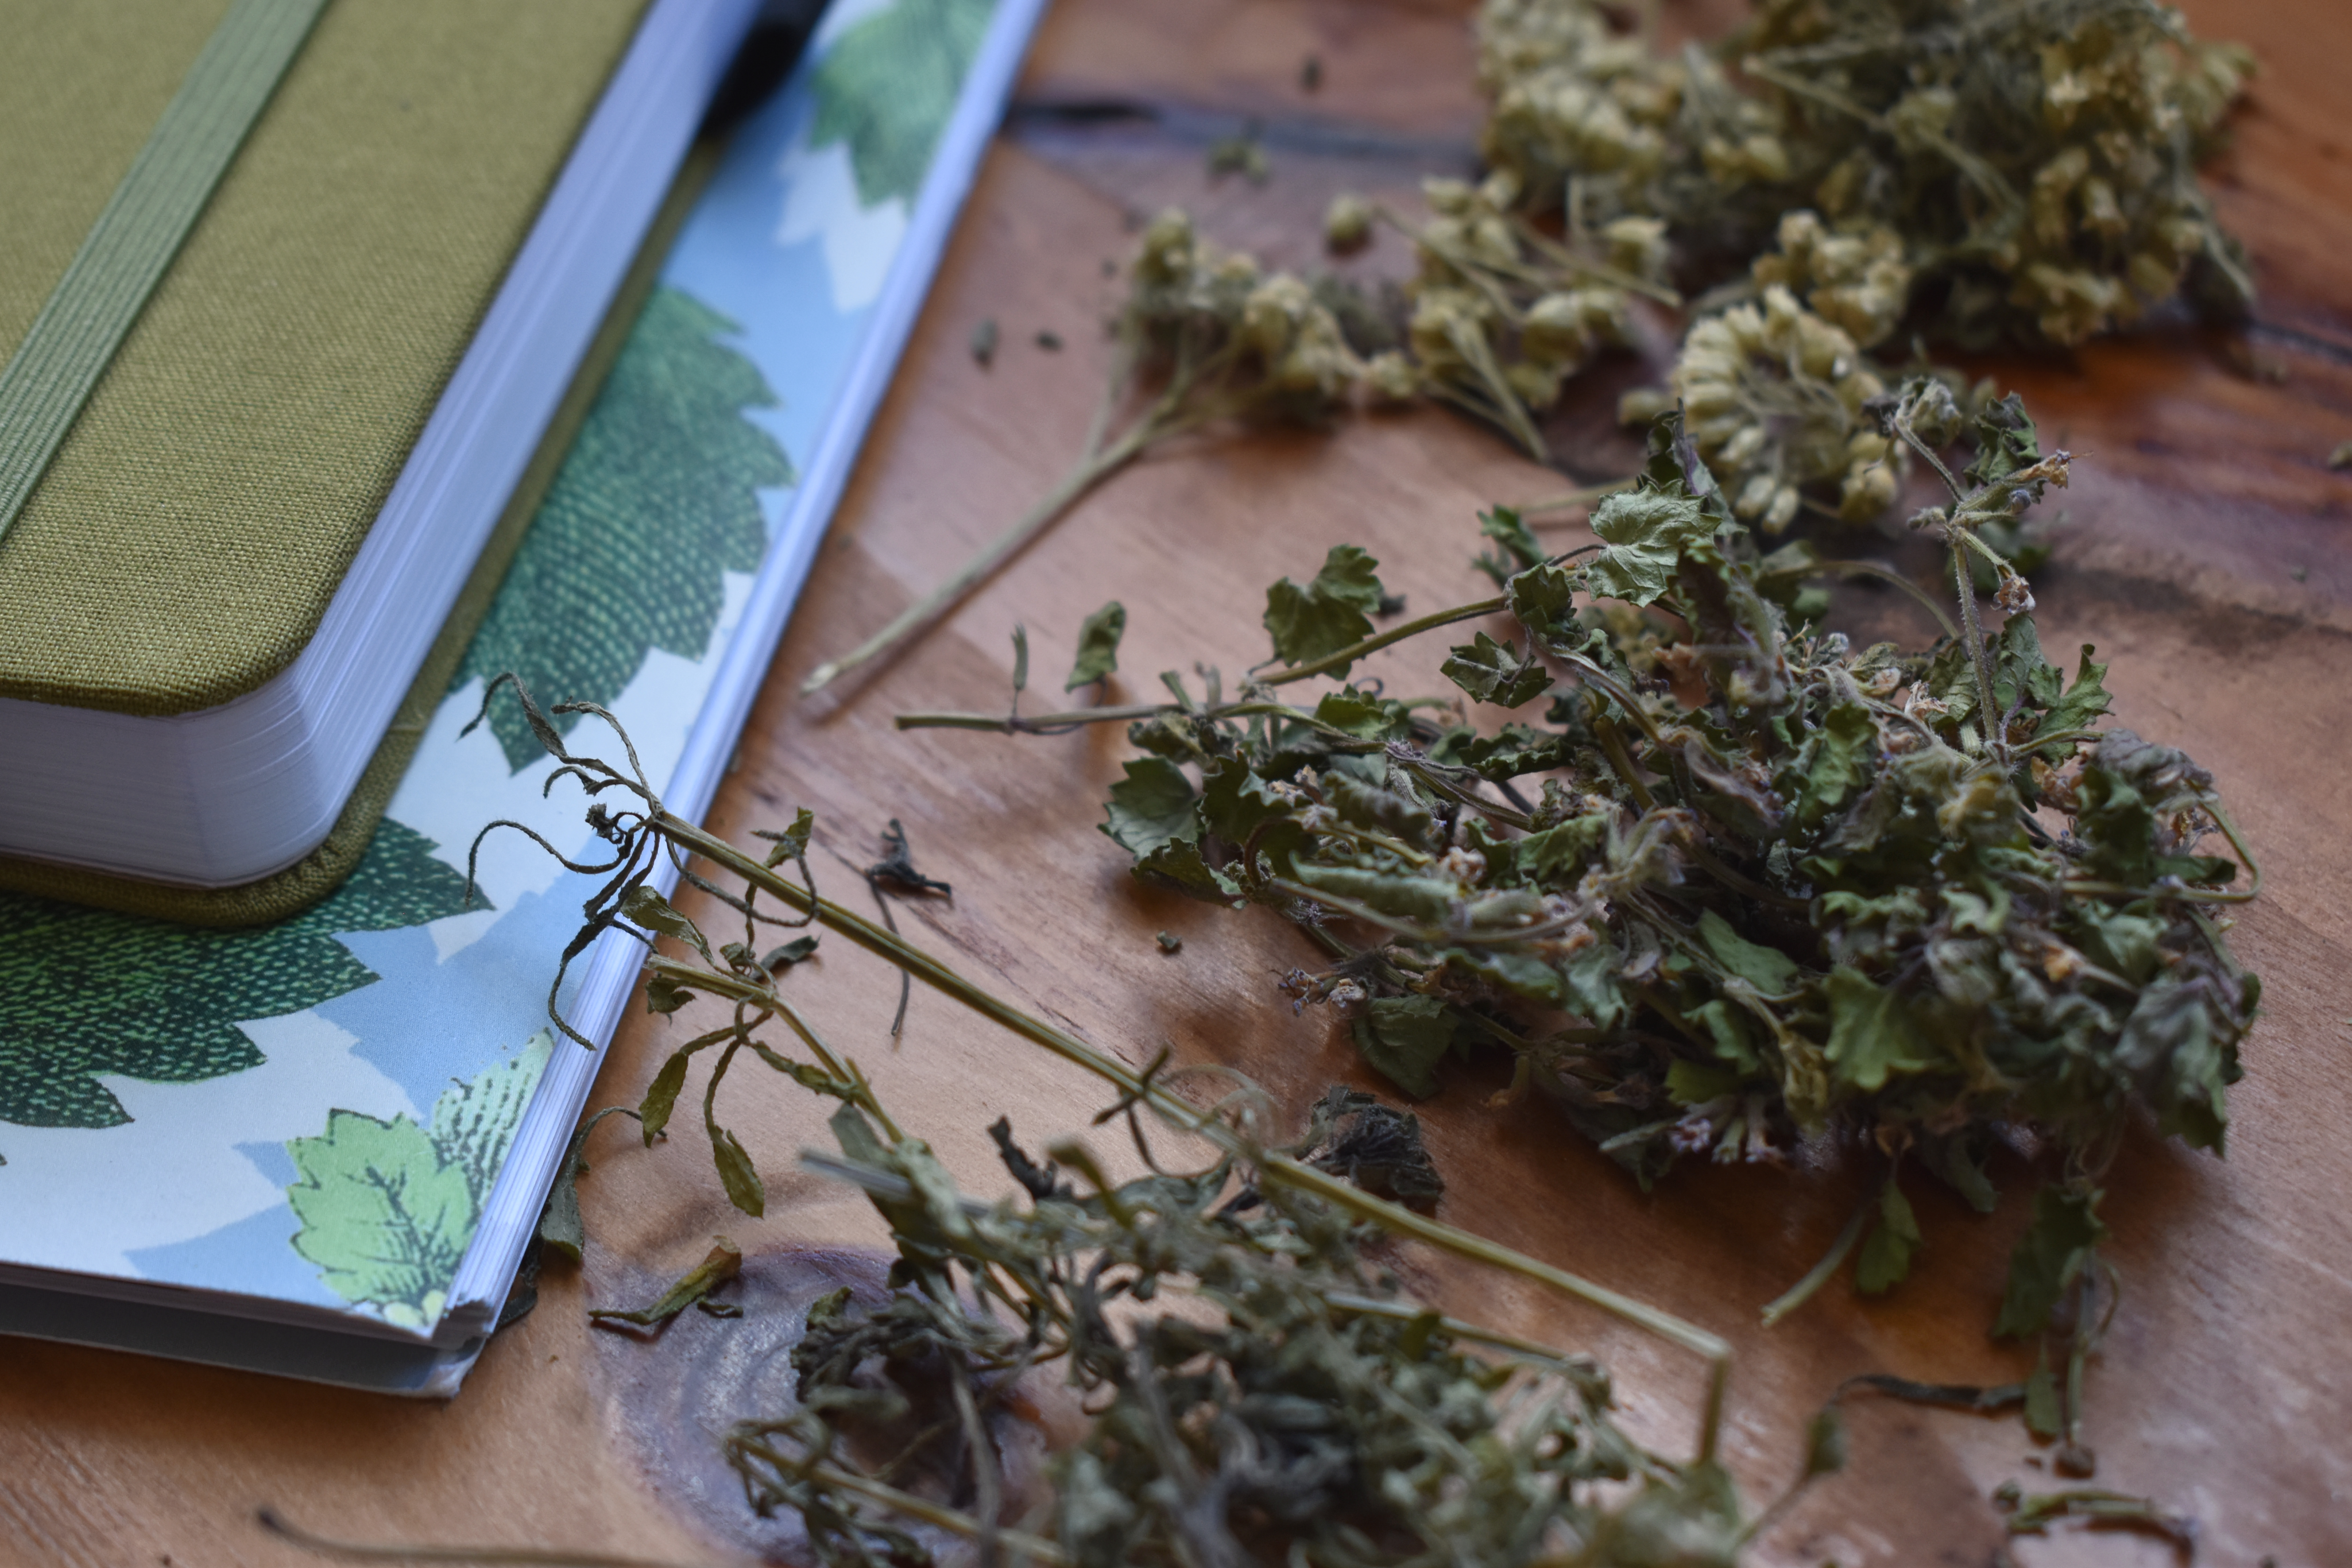 How to tell the quality of dried herbs